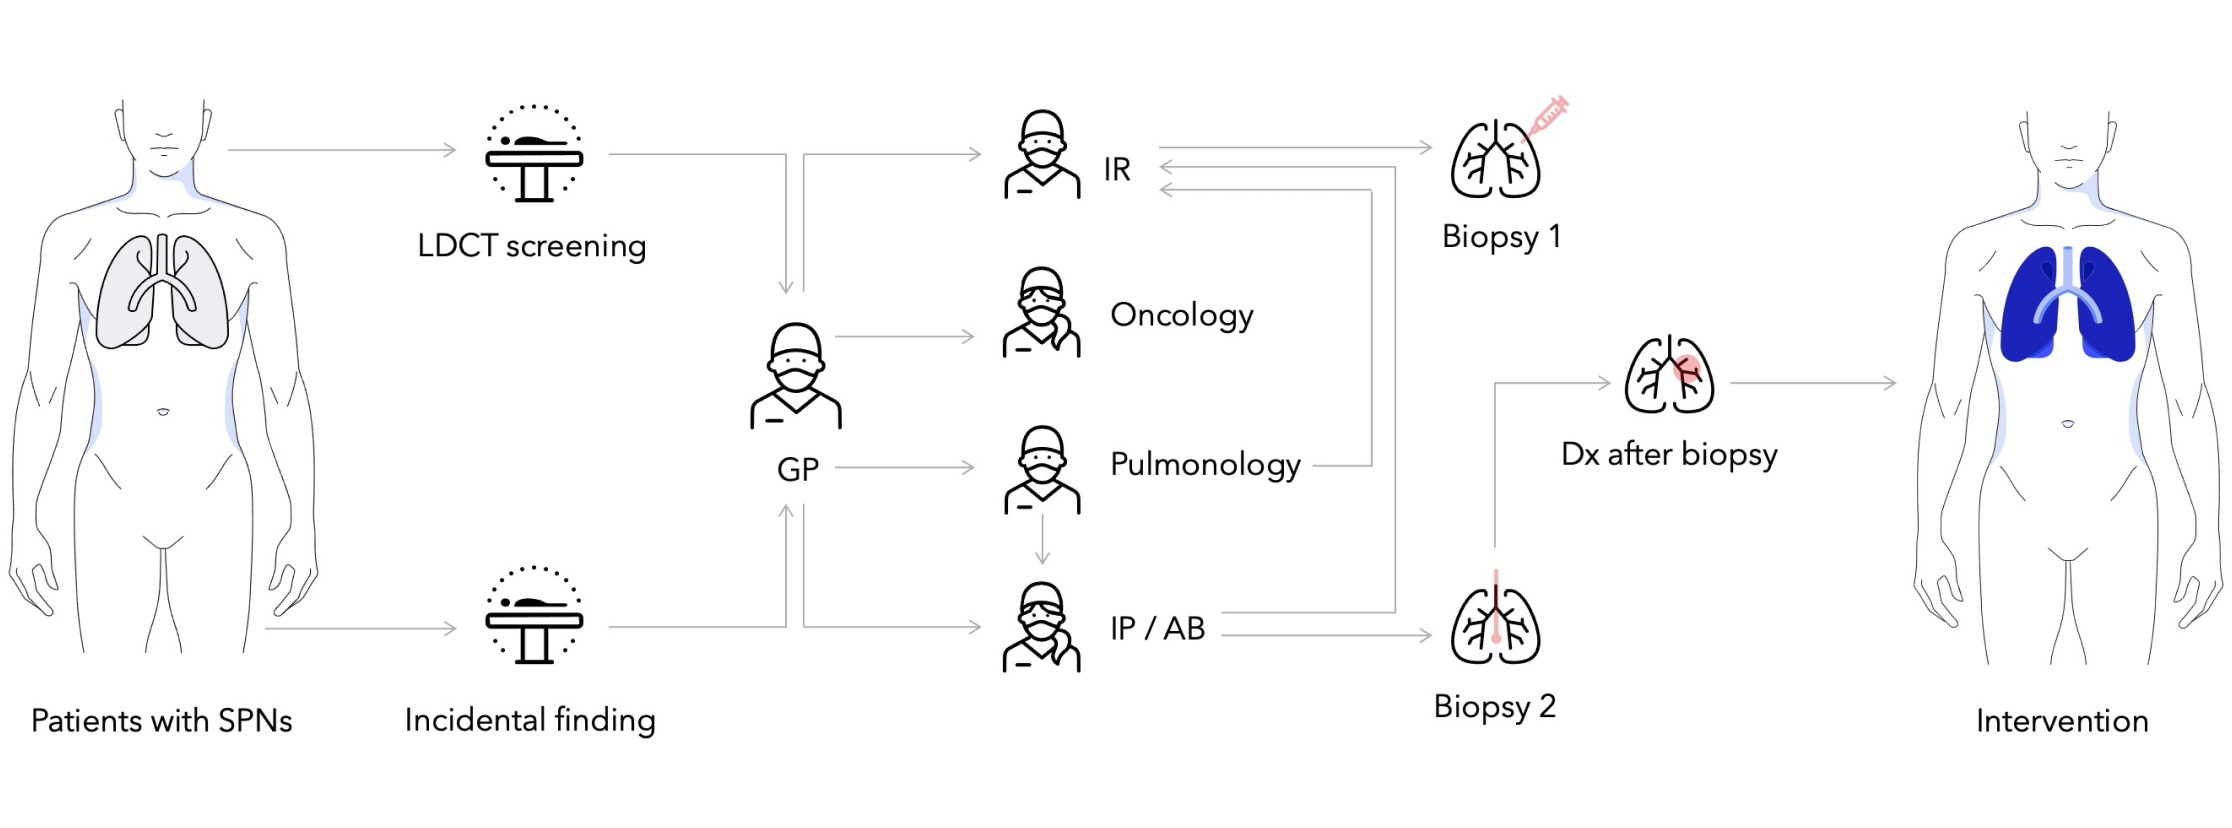 A sequential diagram of the lung care pathway